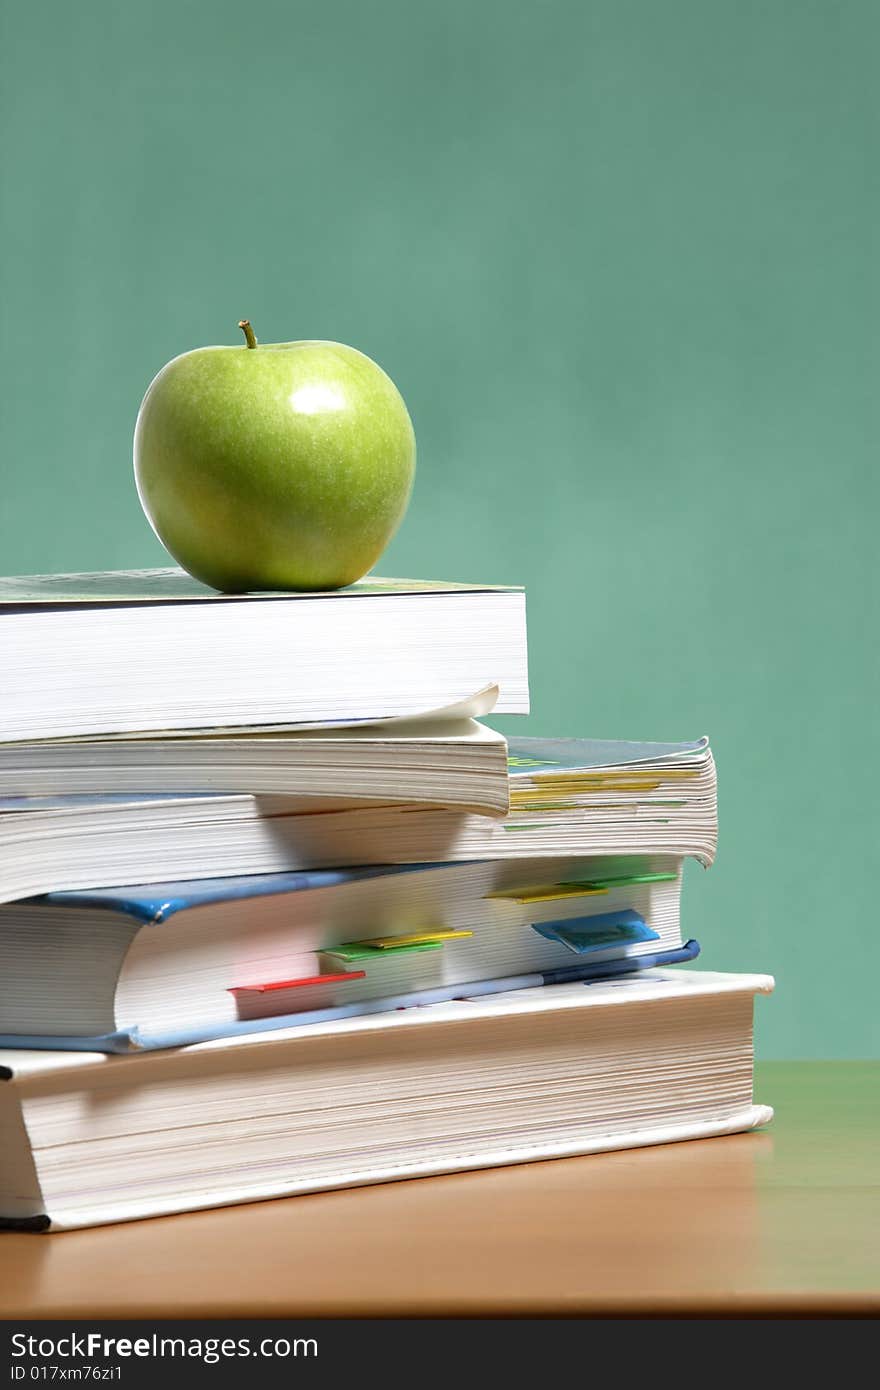 An apple on a stack of books on the teachers desk. An apple on a stack of books on the teachers desk